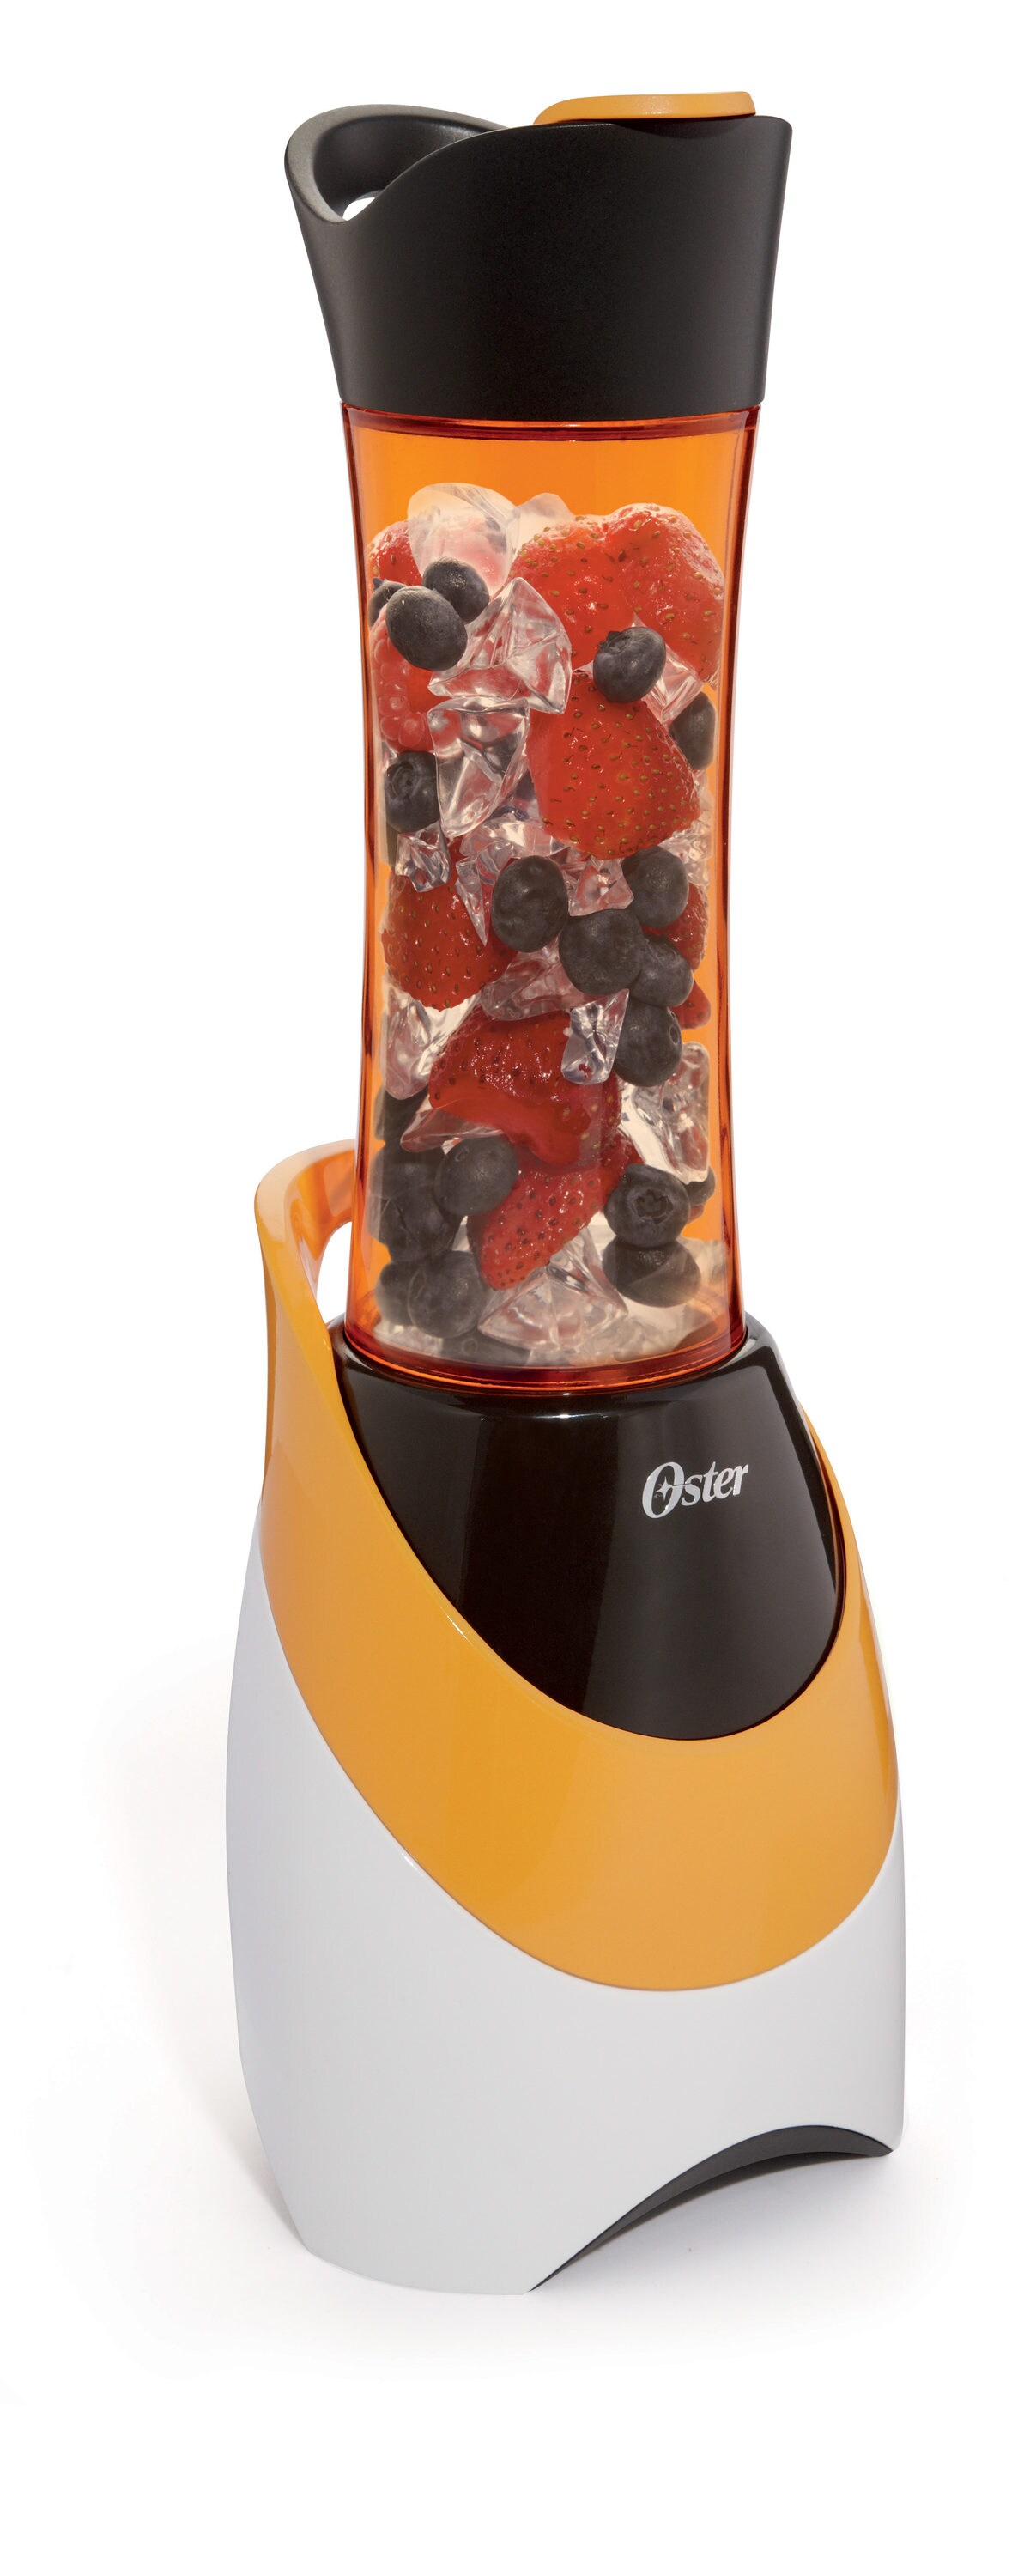 Oster Easy to Clean 700 Watt Blender with 20 Ounce Blend-N-Go Cup